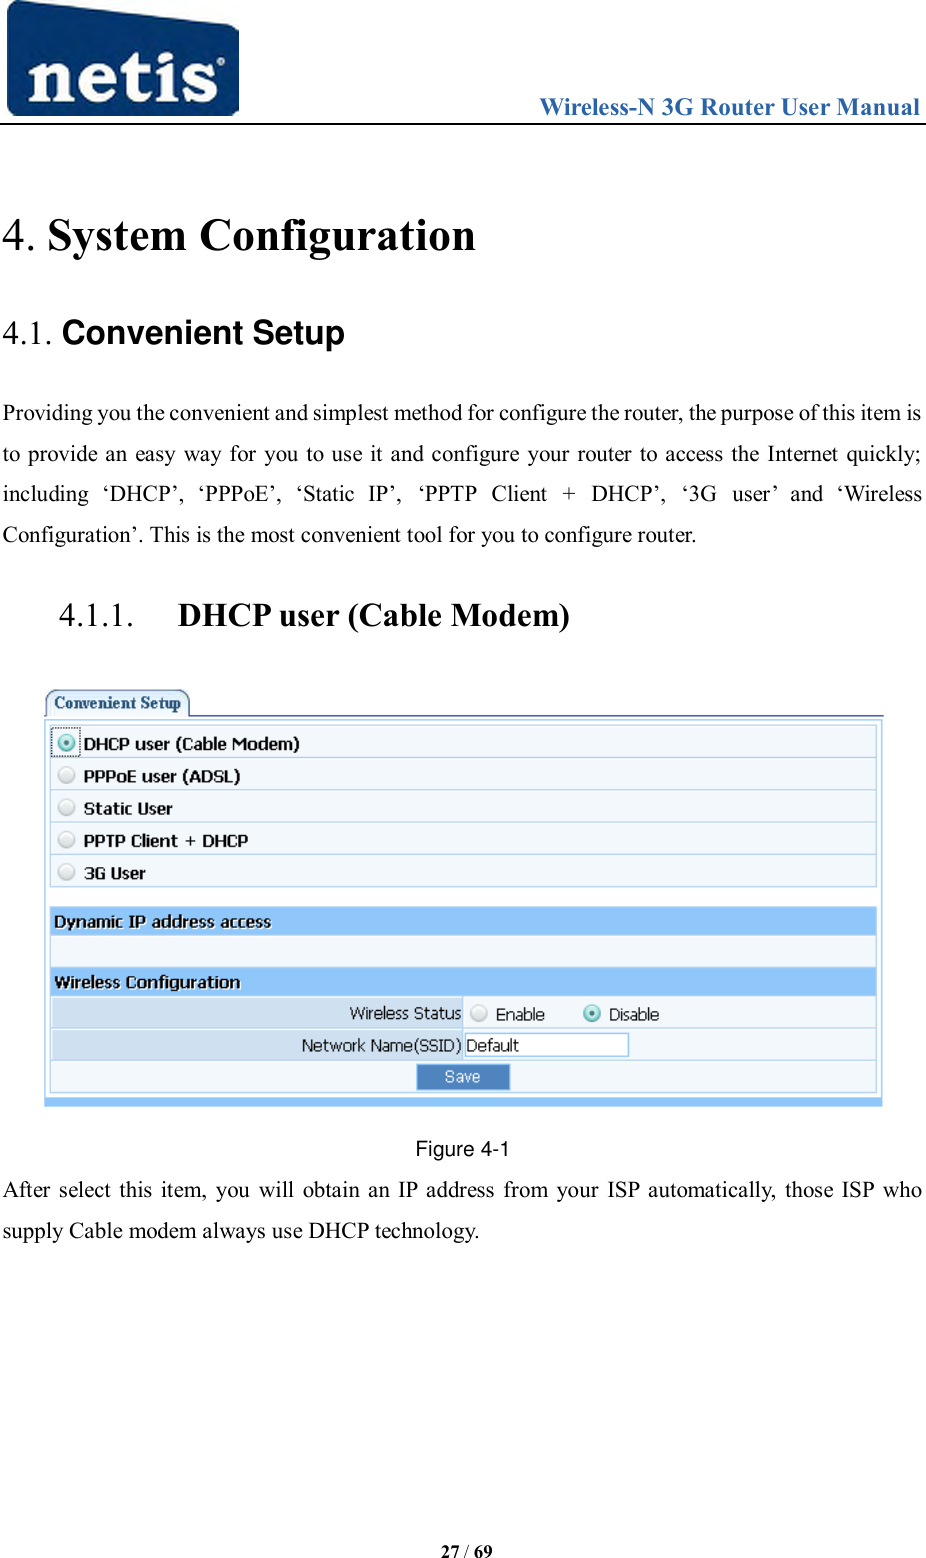                                 Wireless-N 3G Router User Manual  27 / 69  4. System Configuration 4.1. Convenient Setup Providing you the convenient and simplest method for configure the router, the purpose of this item is to provide an easy way for you to use it and configure your router to access the Internet quickly; including  „DHCP‟,  „PPPoE‟,  „Static  IP‟,  „PPTP  Client  +  DHCP‟,  „3G  user‟  and  „Wireless Configuration‟. This is the most convenient tool for you to configure router. 4.1.1. DHCP user (Cable Modem)  Figure 4-1 After select this item, you will obtain an IP address from your ISP automatically, those ISP who supply Cable modem always use DHCP technology. 